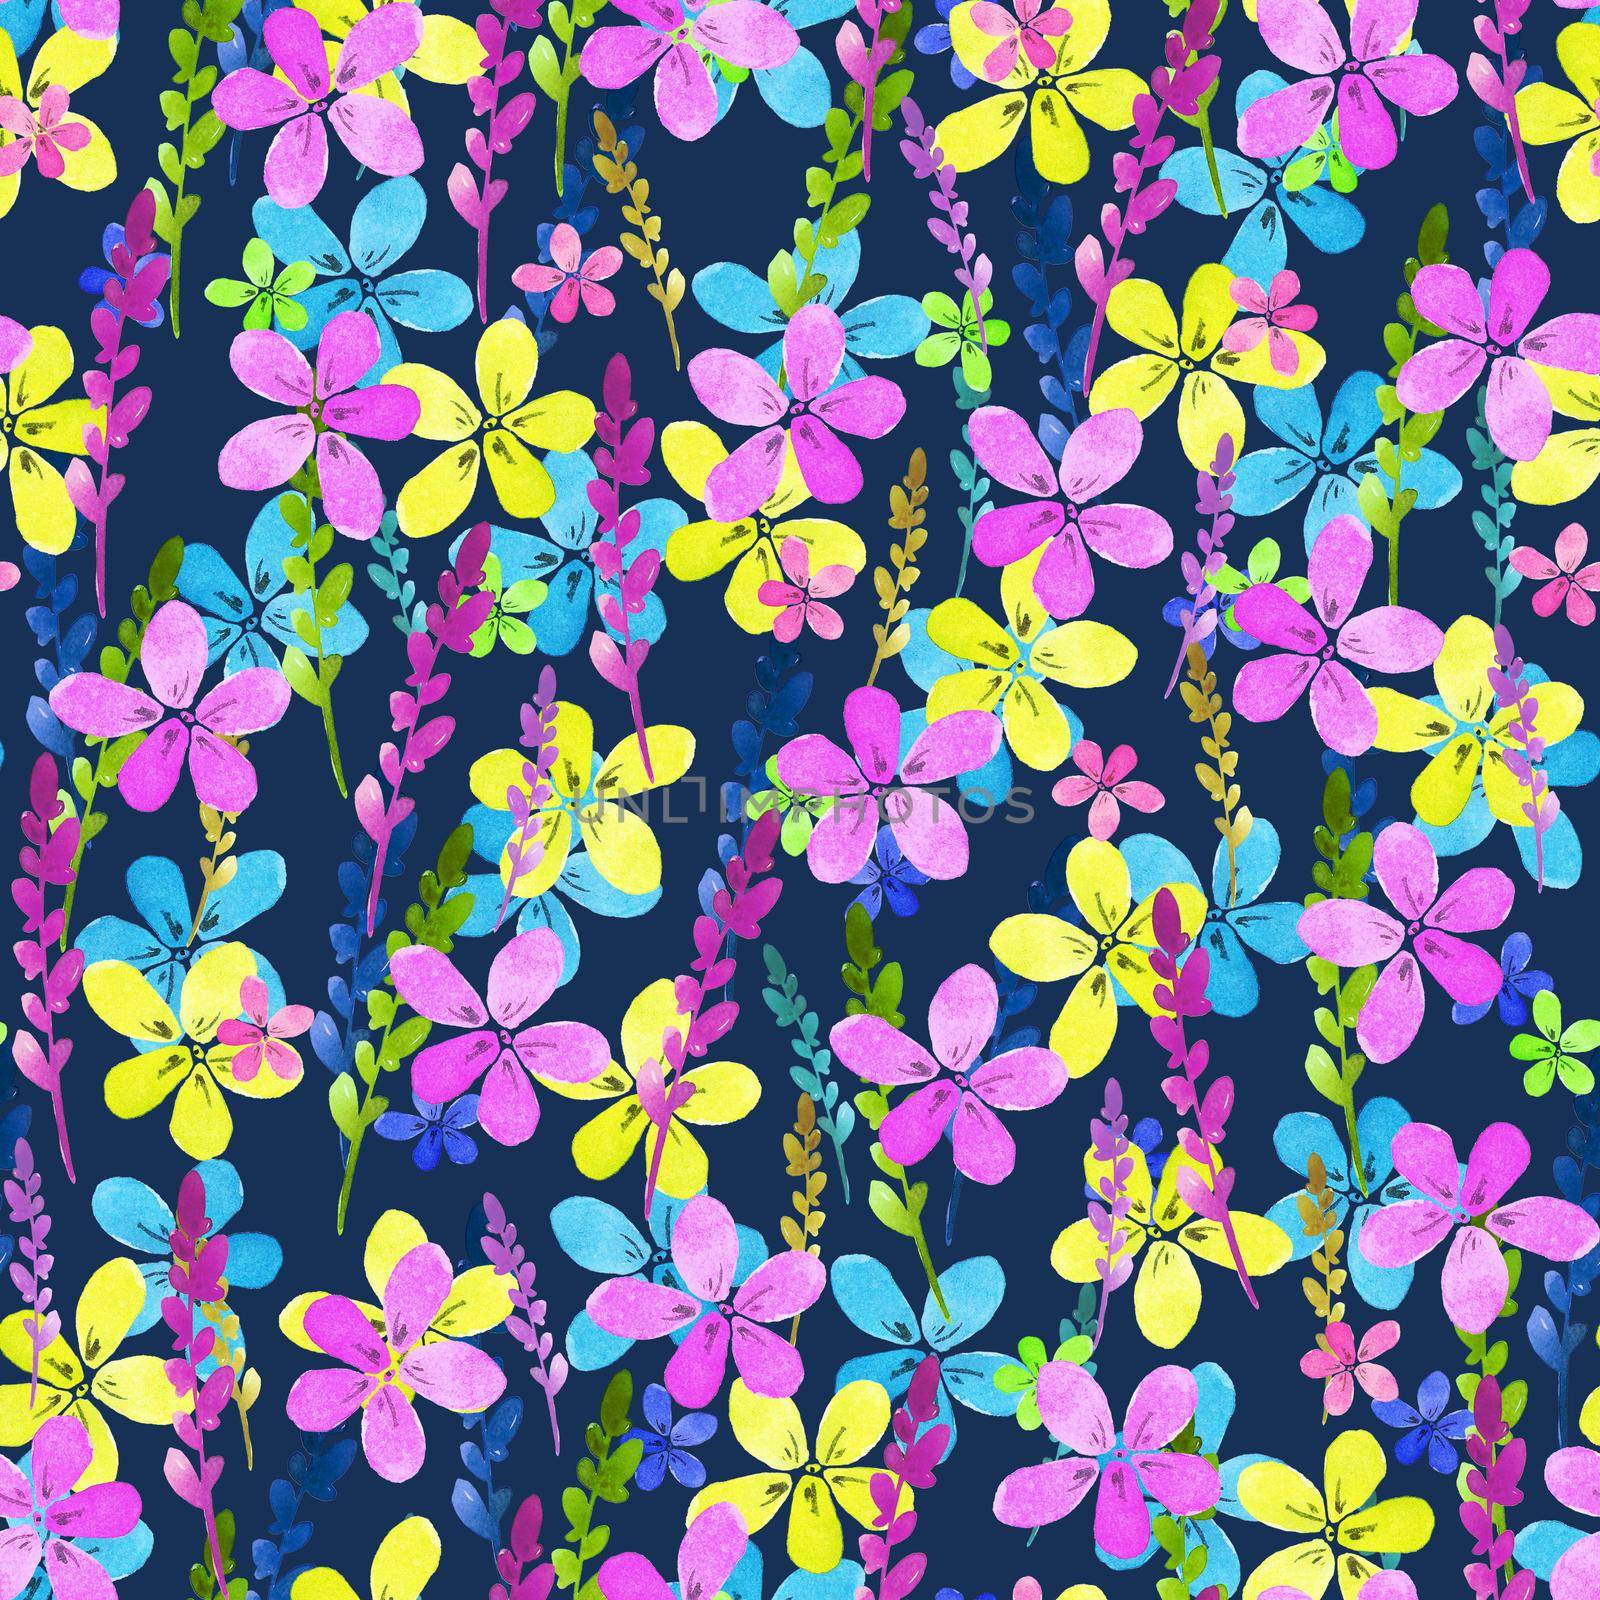 Seamless floral pattern with watercolor blue pink yellow flowers and leaves in vintage style on background. . Hand made. Ornate for textile, fabric. Nature illustration. Painting elements. by DesignAB